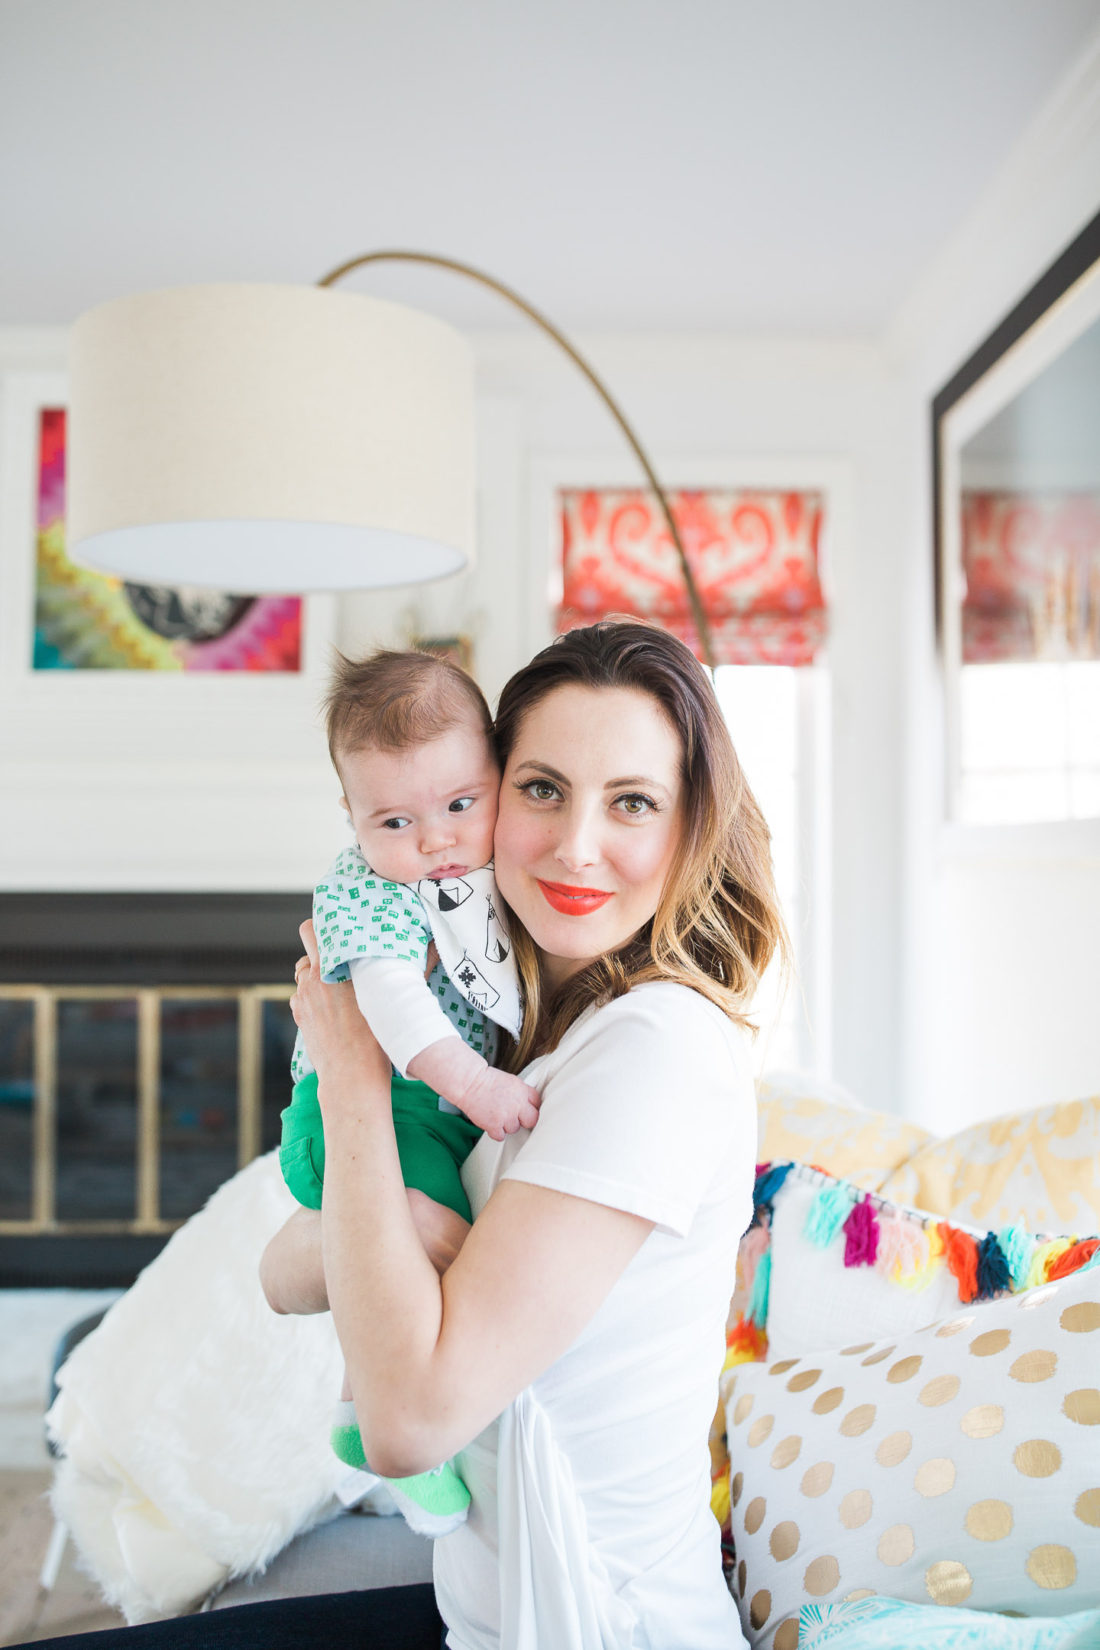 Eva Amurri Martino wears a white Tshirt and red lipstick, and holds her infant son, Major, to her cheek